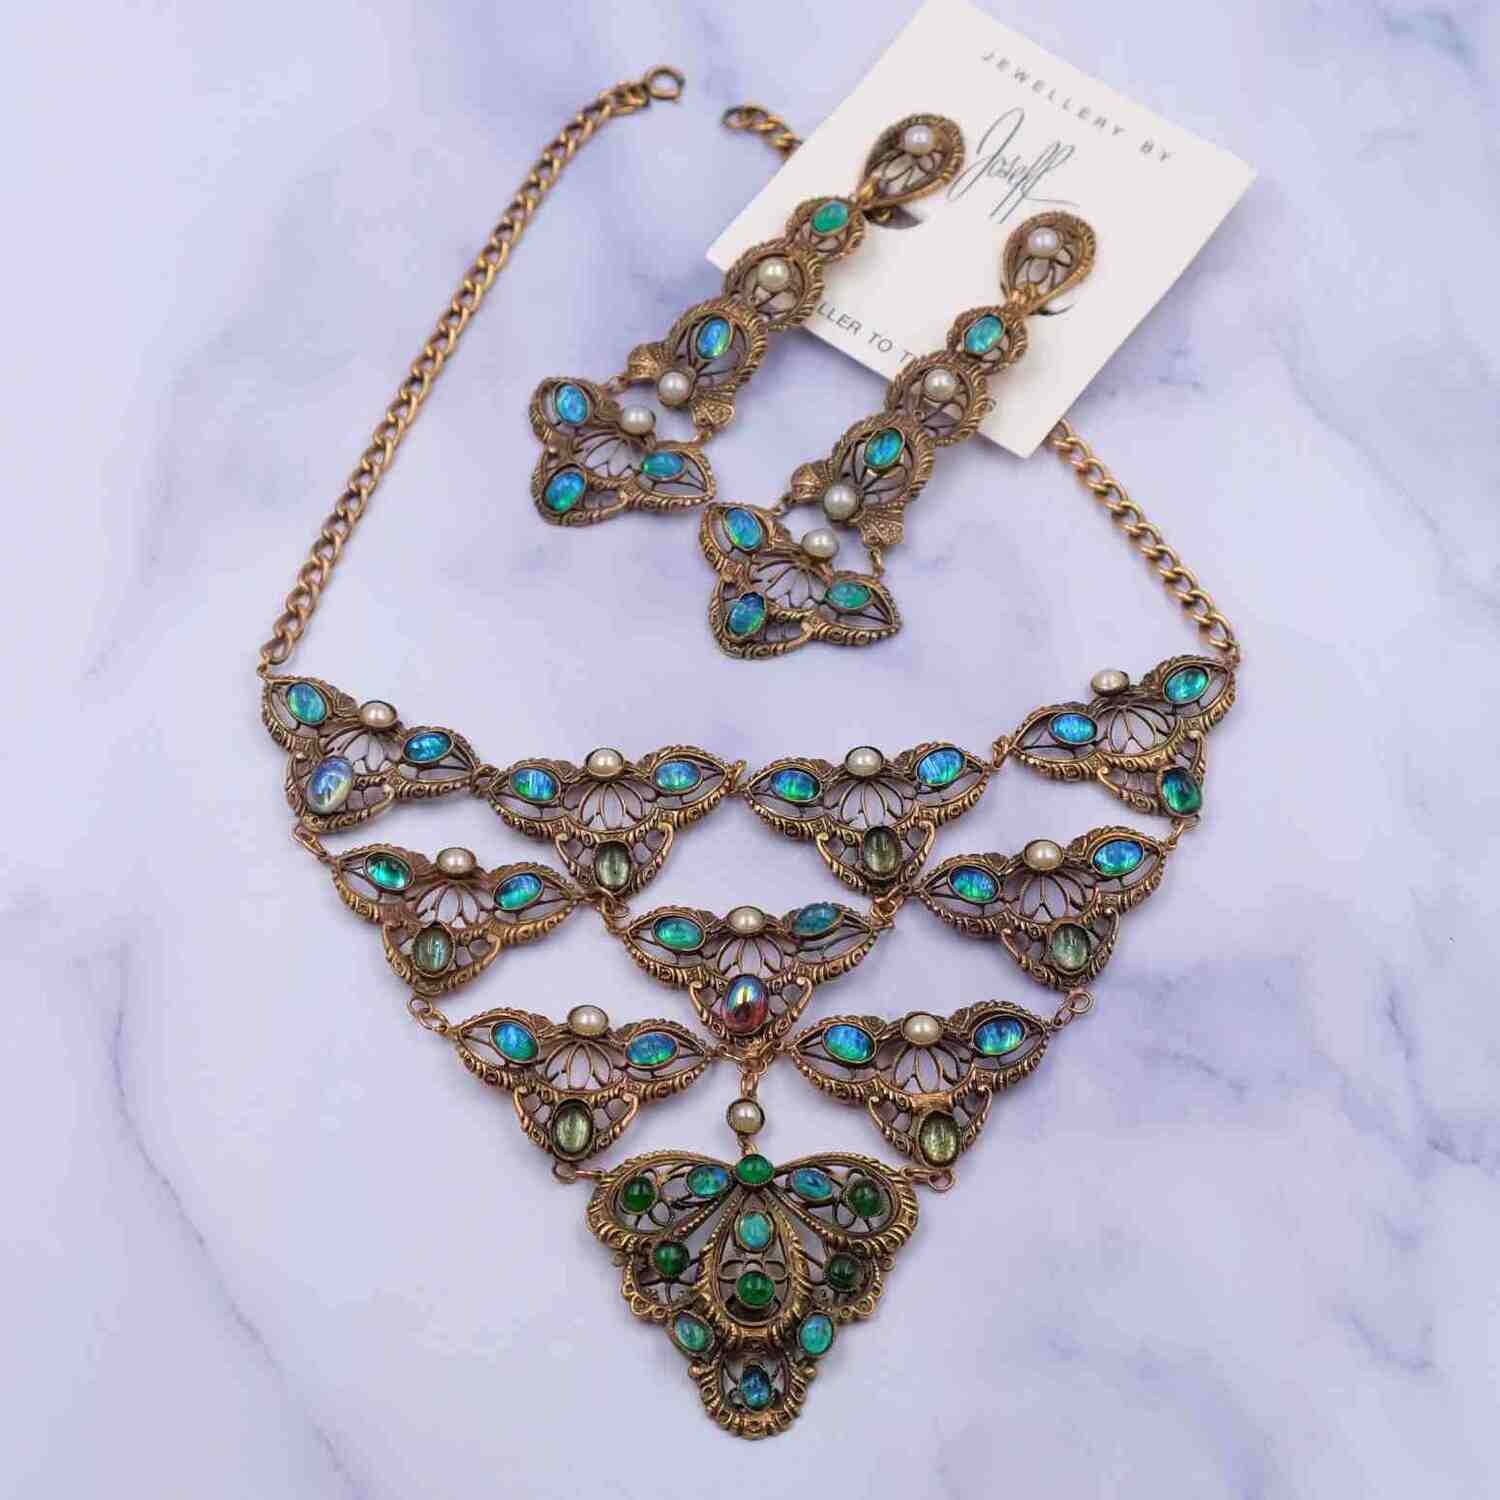 Very Collectible Joseff of Hollywood Art Nouveau Necklace and Earrings Set 1940’s